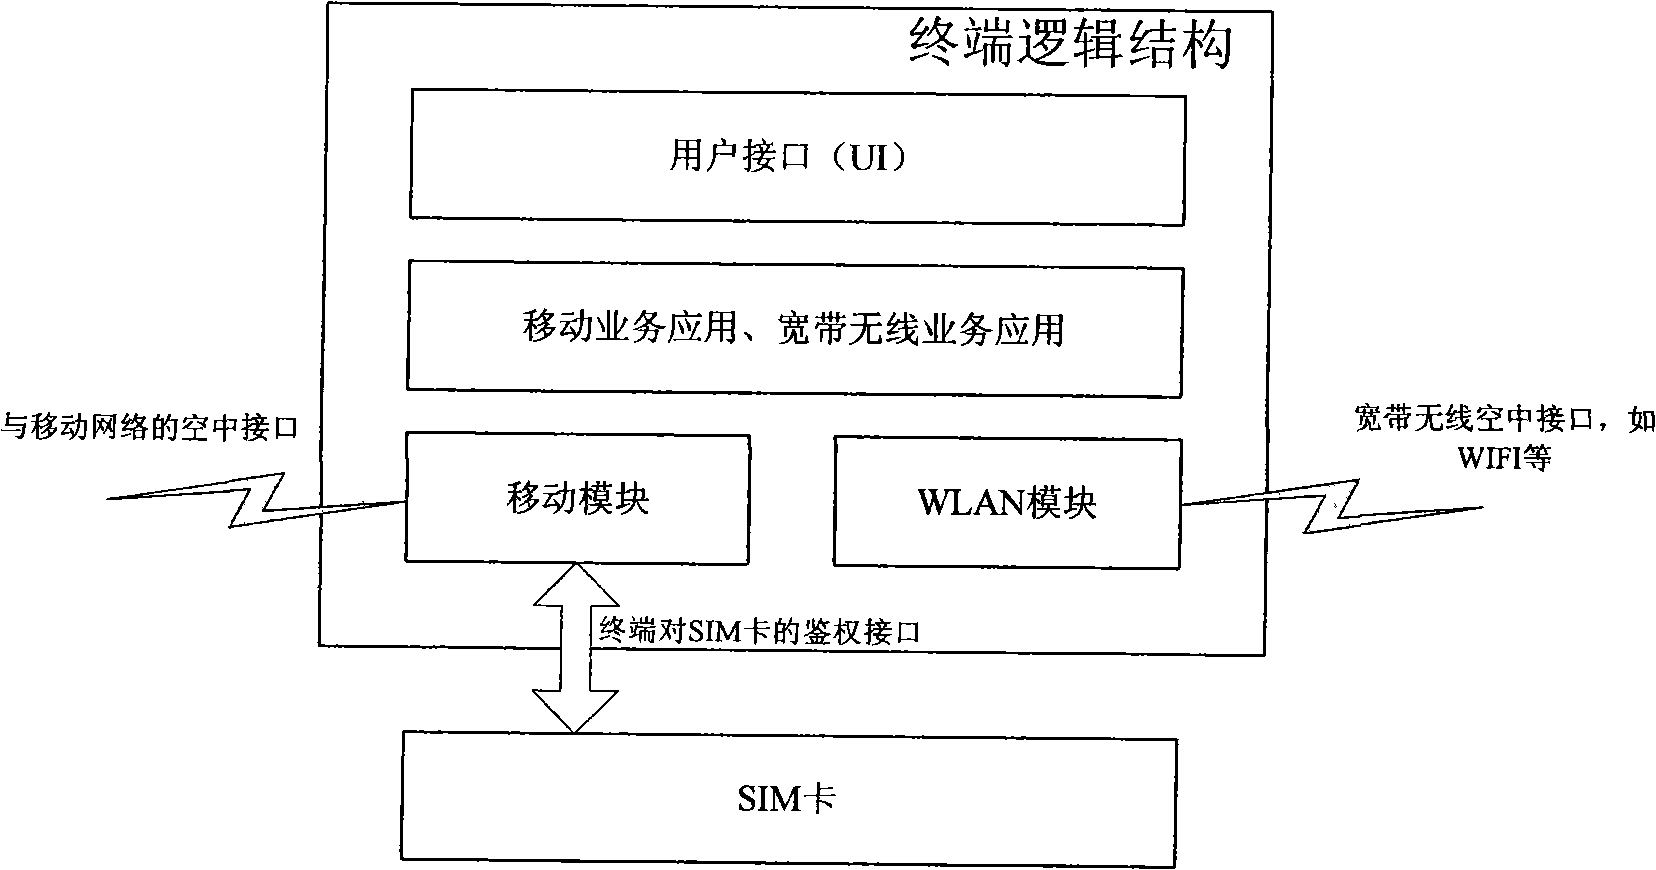 Single/double mode hand-hold terminal and implementing method thereof